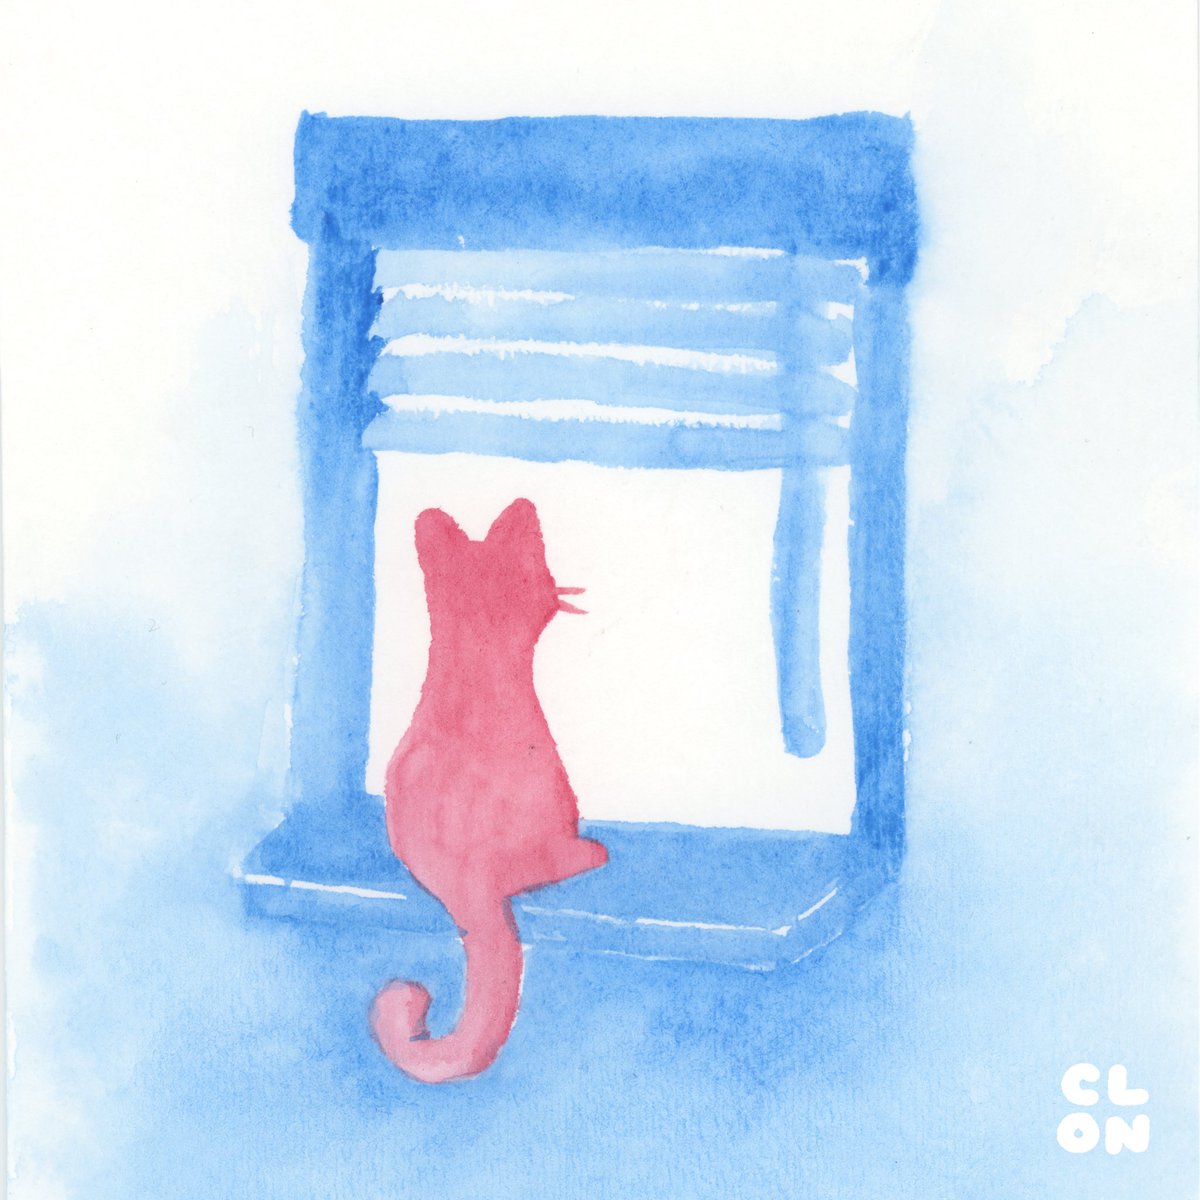 Just picked up “Cat in the Window”, a 1/1 watercolor by the legendary @cloncast. It’s been a goal of mine to own a piece from this collection since joining the @coolcatsnft community last year.

Shoutout to @casualhindu for the alpha.

#WeLikeTheCats